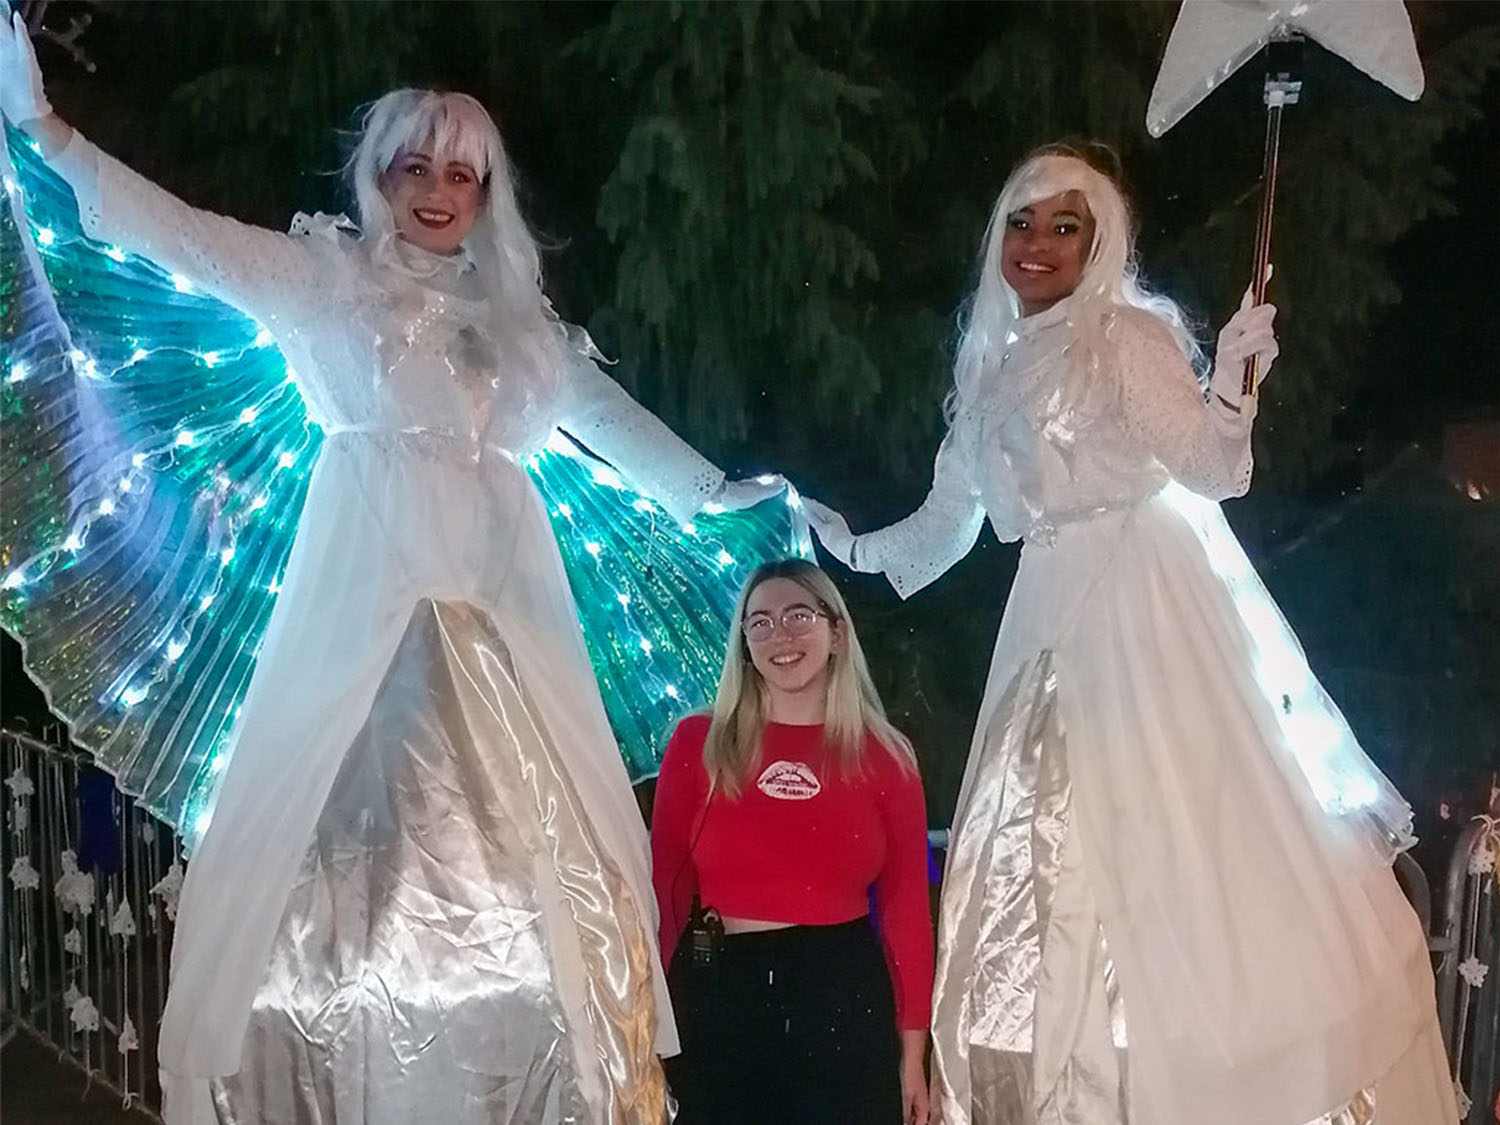 BA (Hons) Event Management student, Sian (pictured) posing for a photo with the Christmas angels (part of the event)